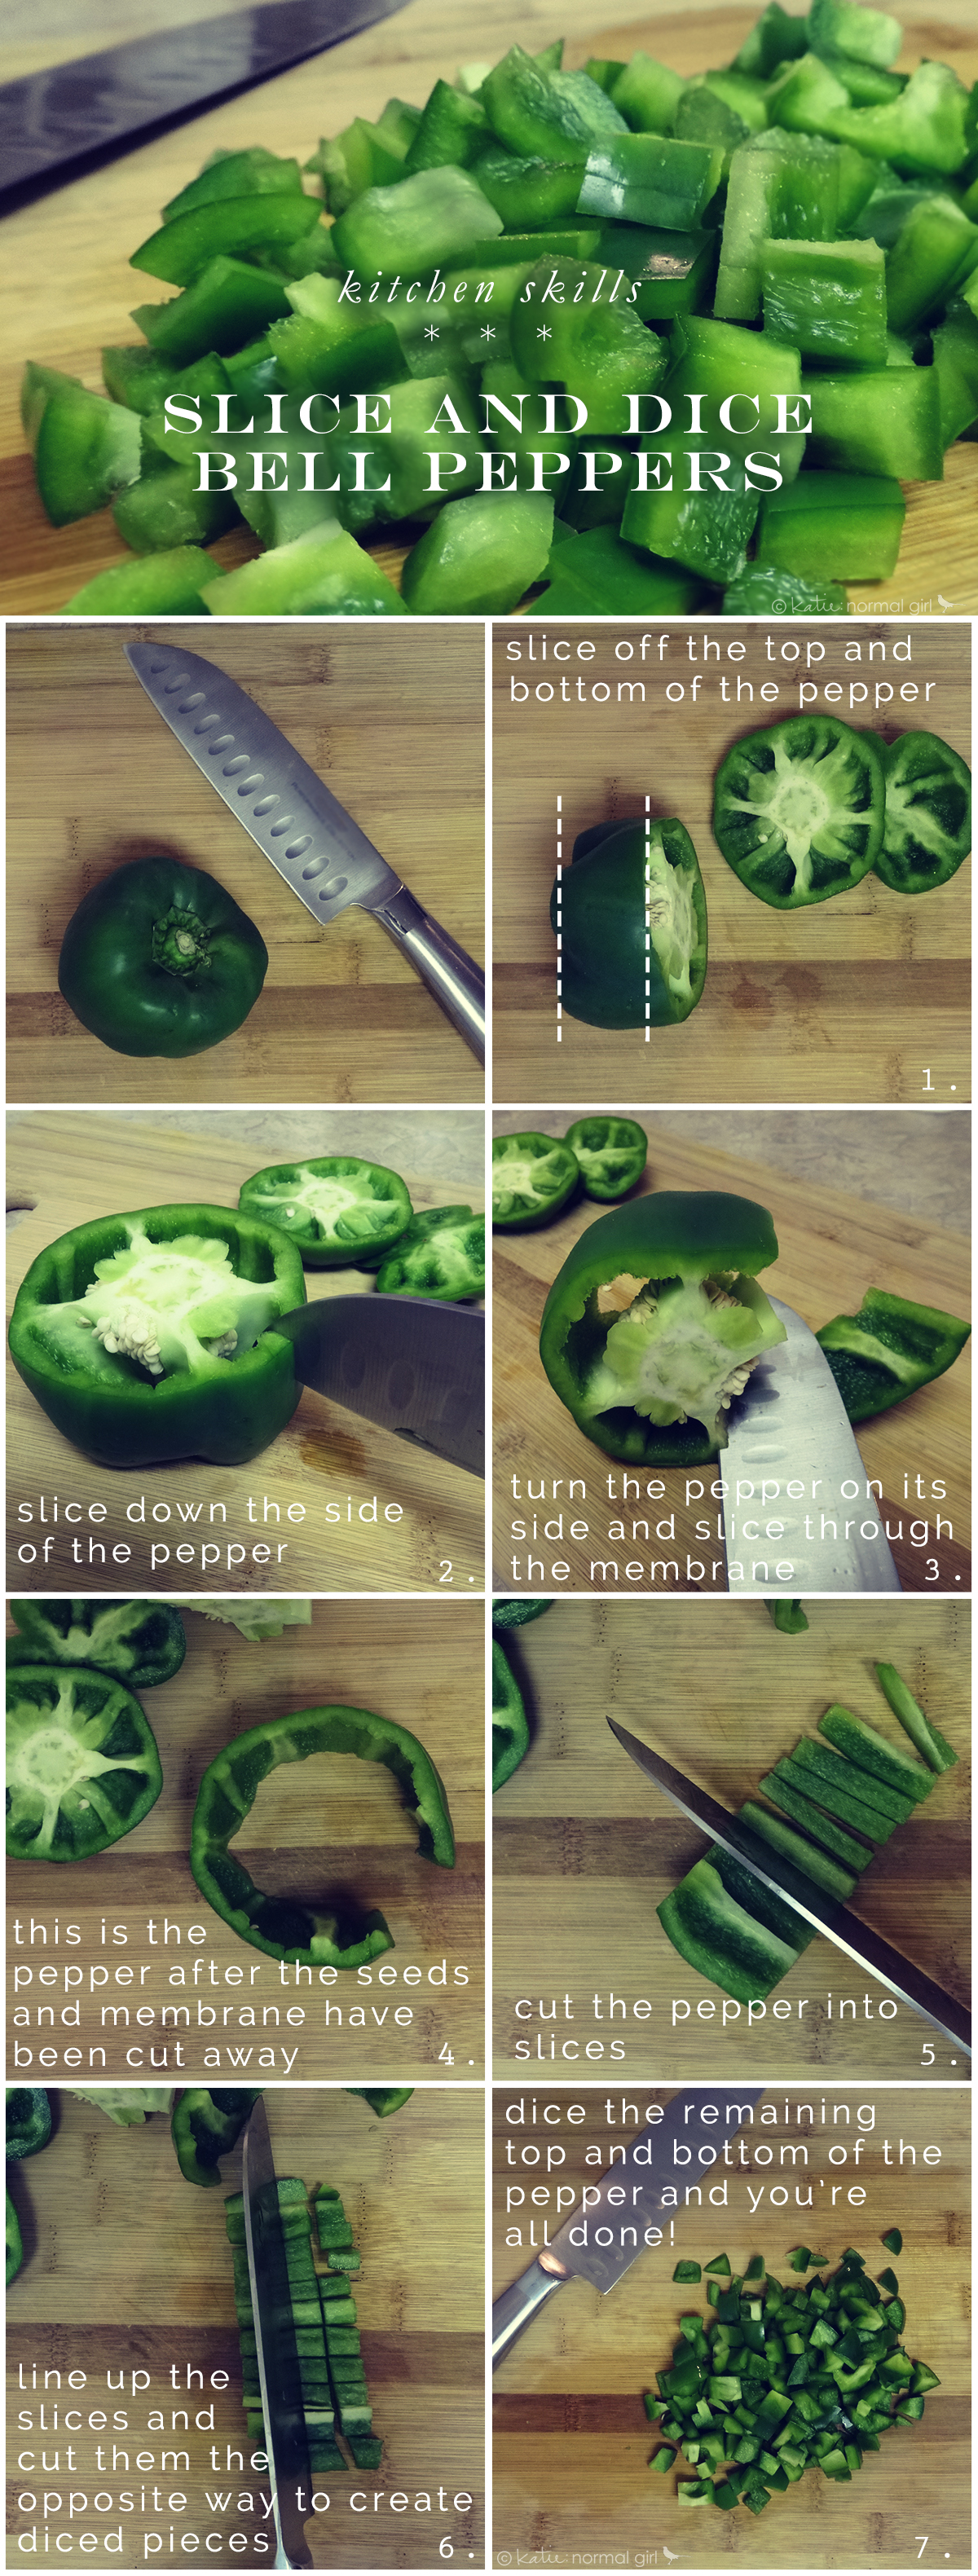 How to slice and dice a bell pepper from katienormalgirl.com #lifeskills #cooking